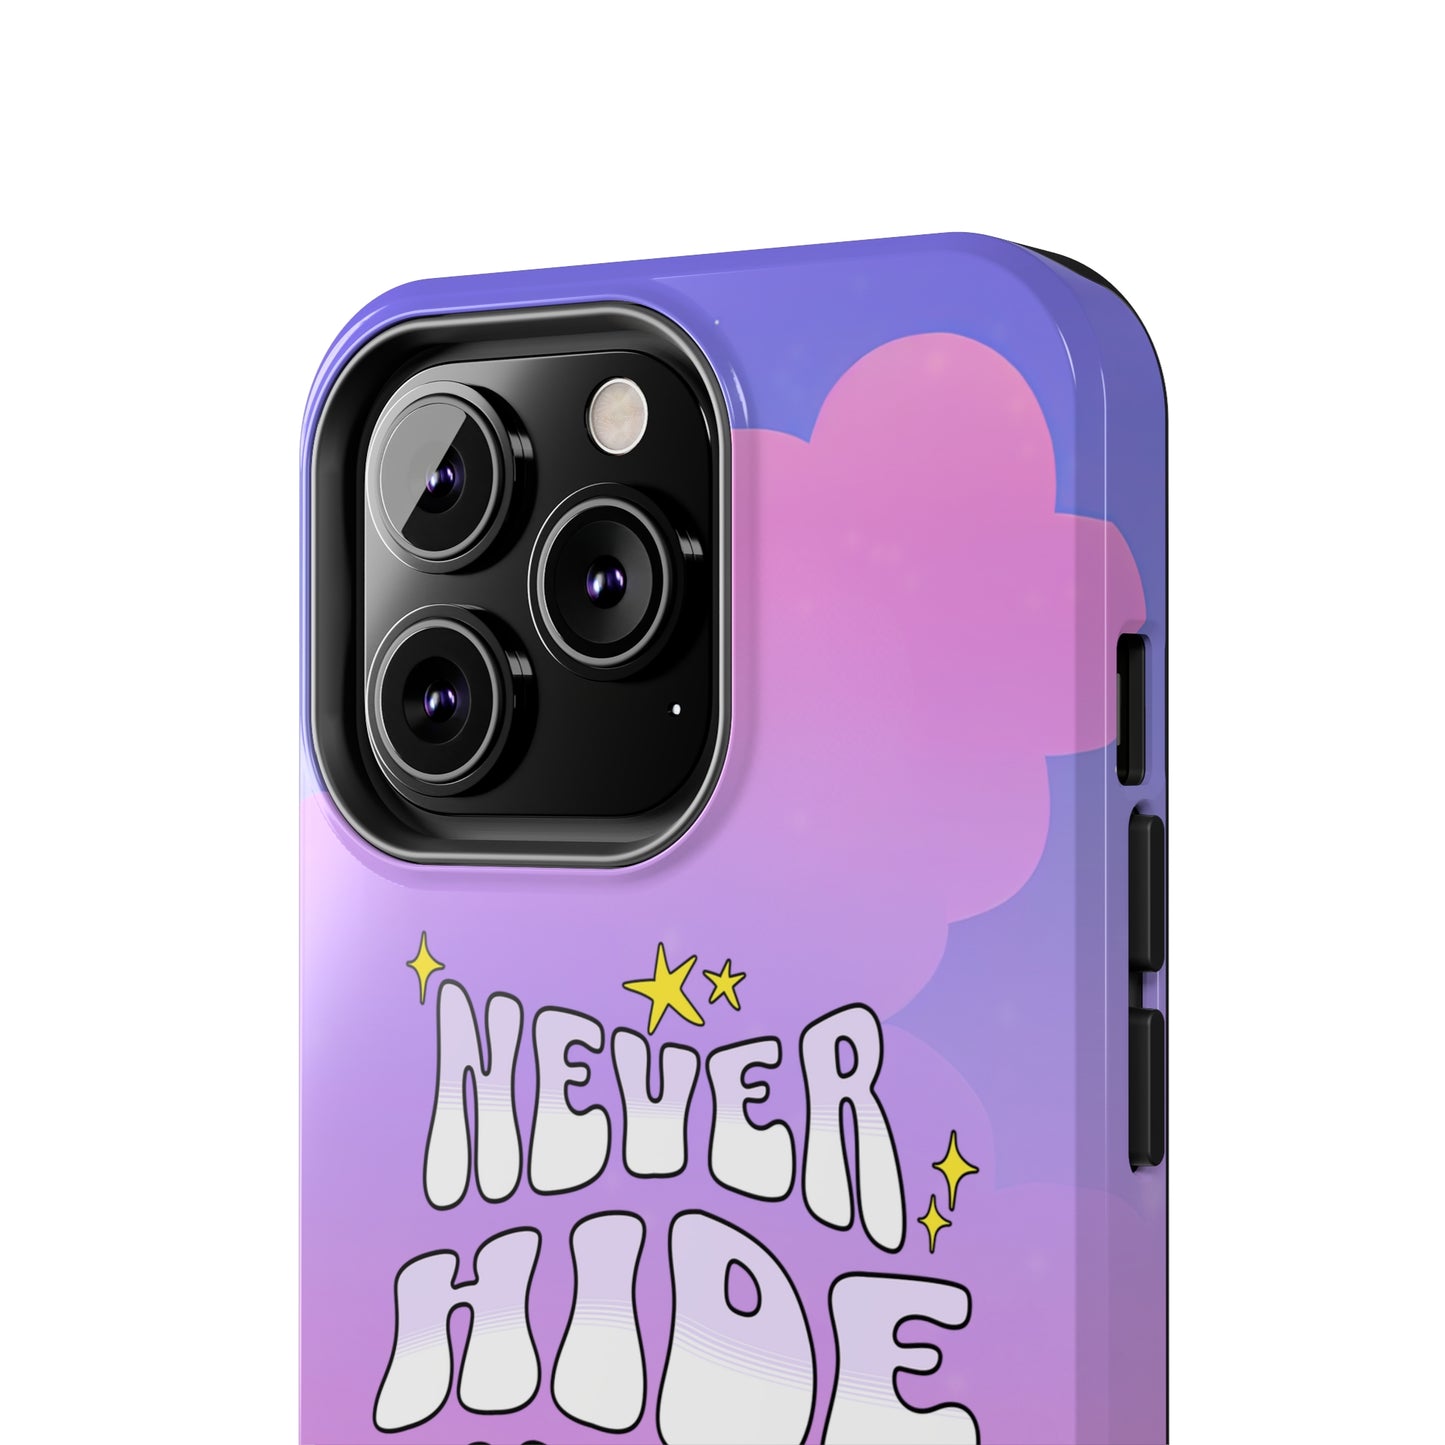 Never Hide Your Magic iPhone Case